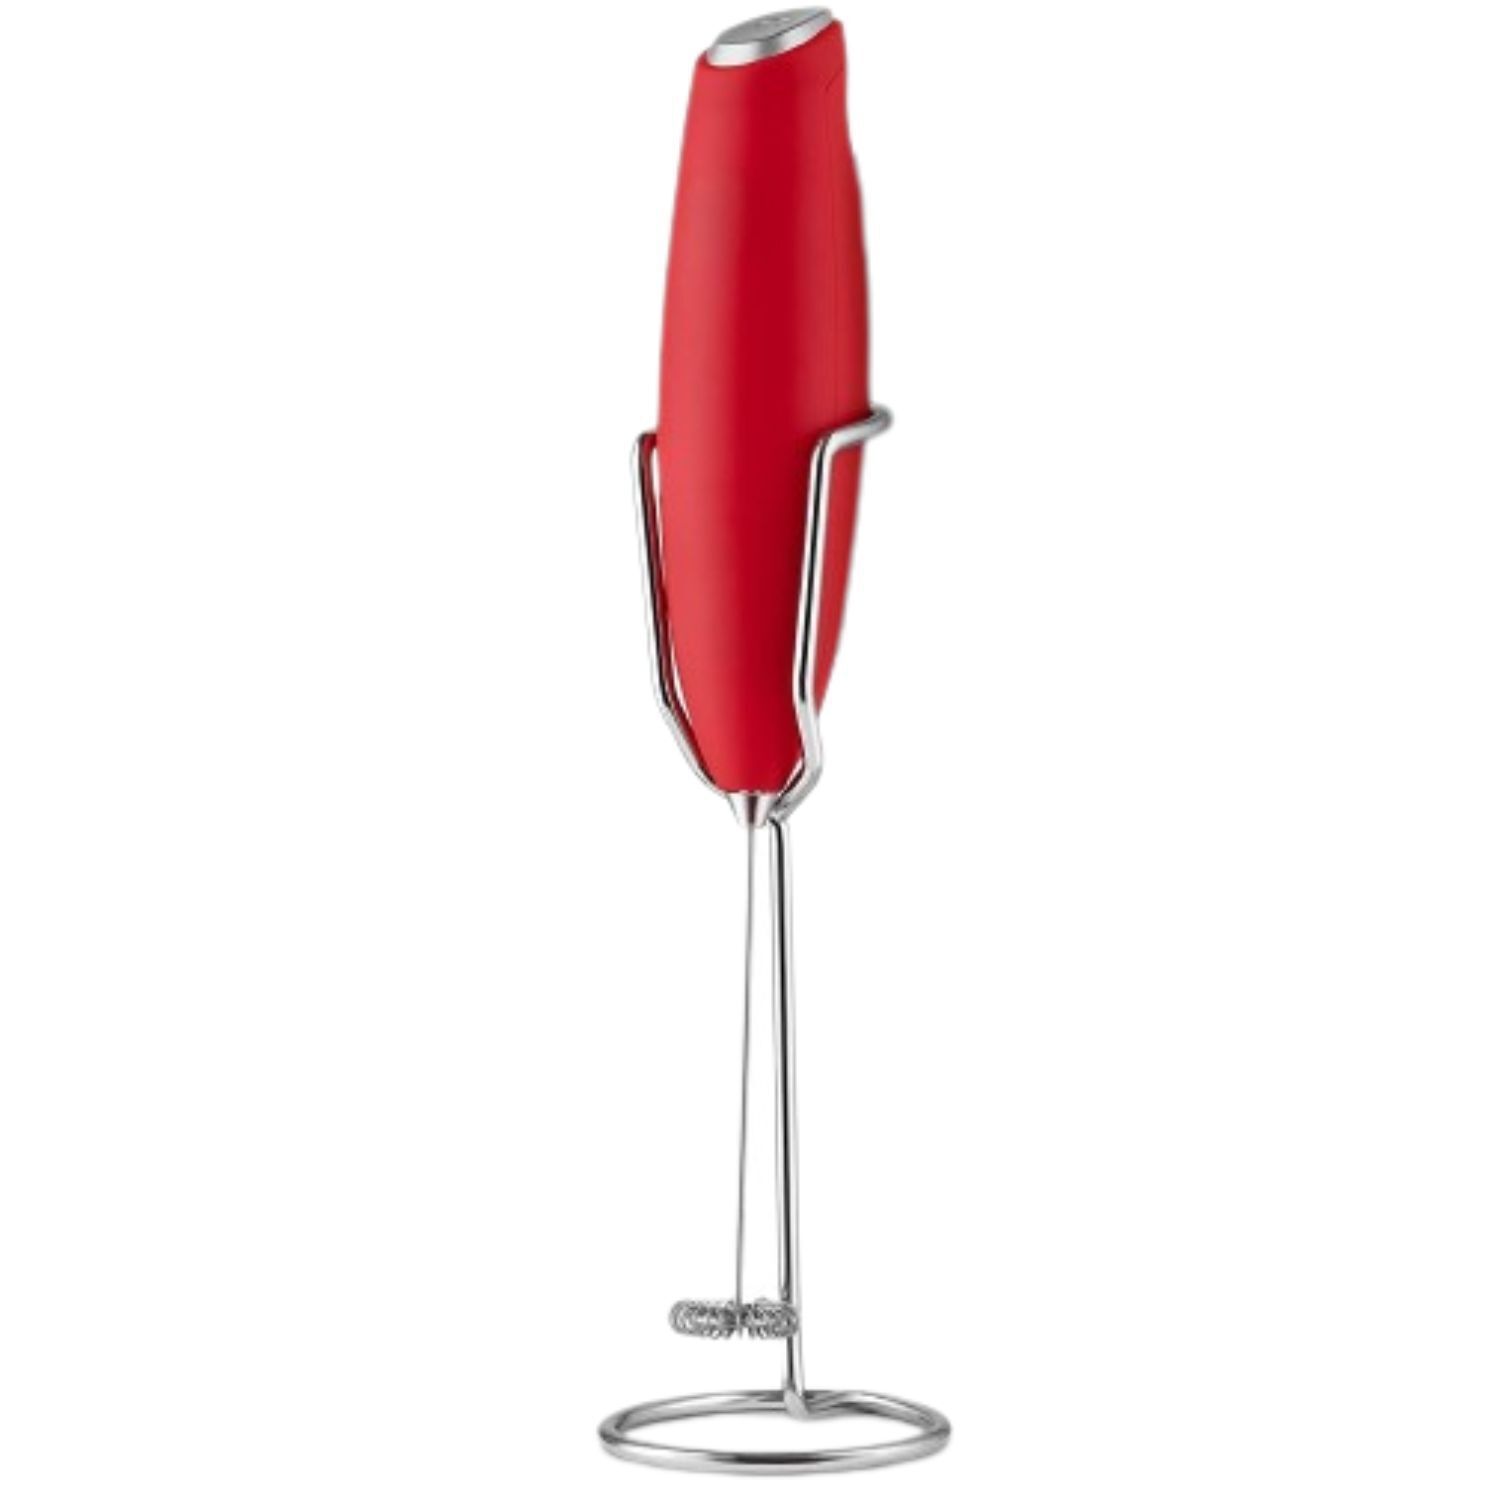 Peach Street Red Handheld Battery Operated Milk Frother Mini Milk Foamer